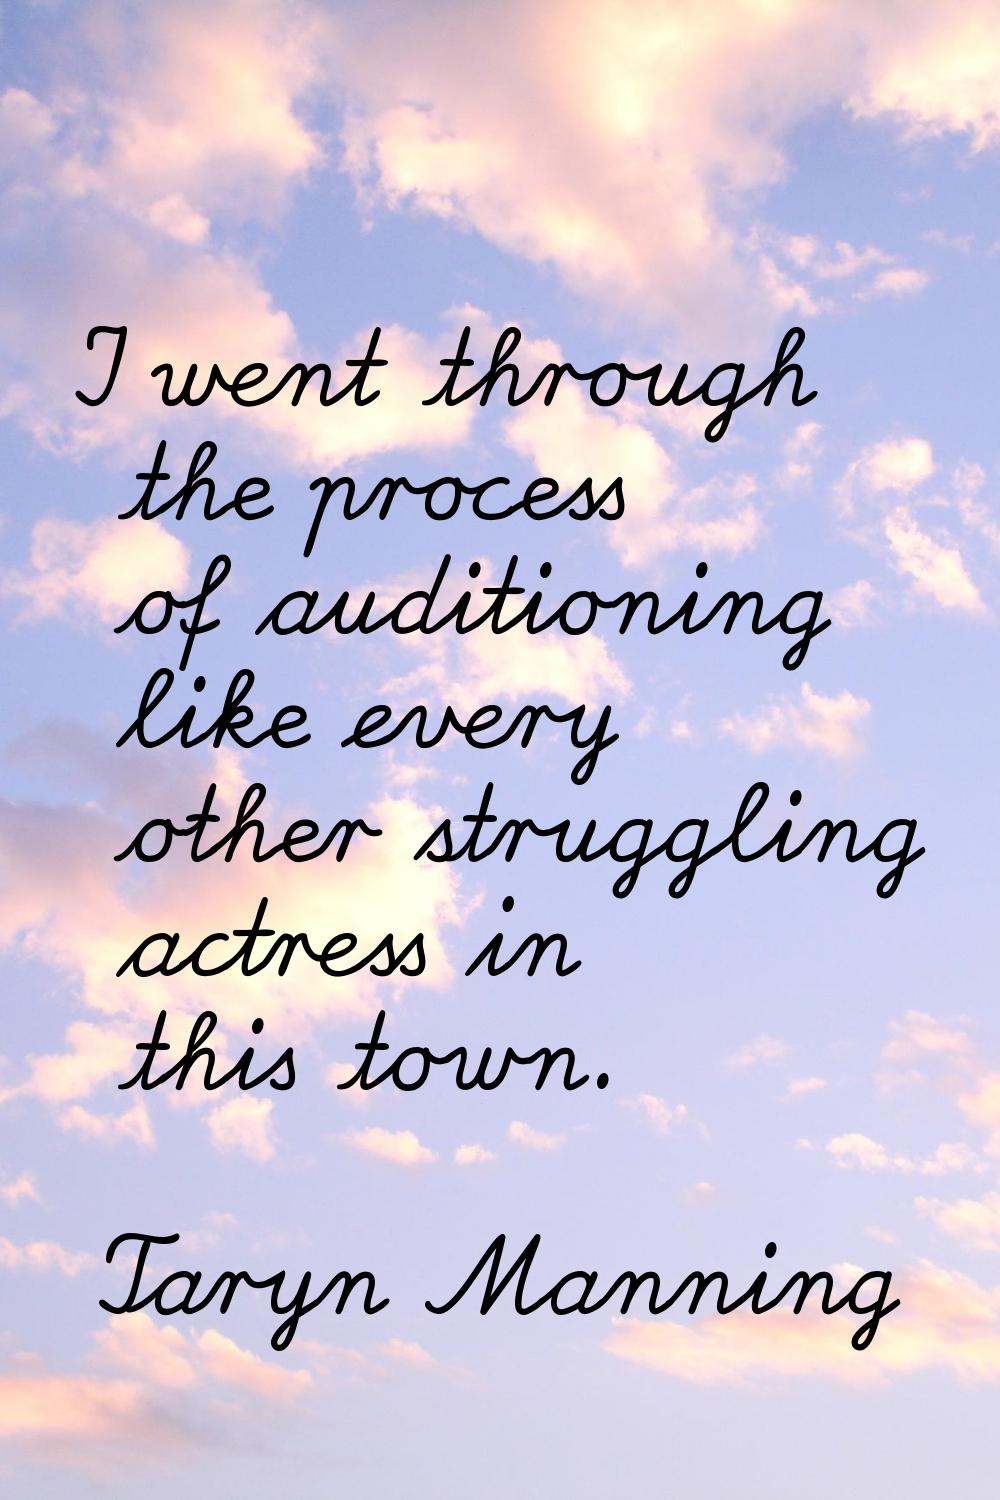 I went through the process of auditioning like every other struggling actress in this town.